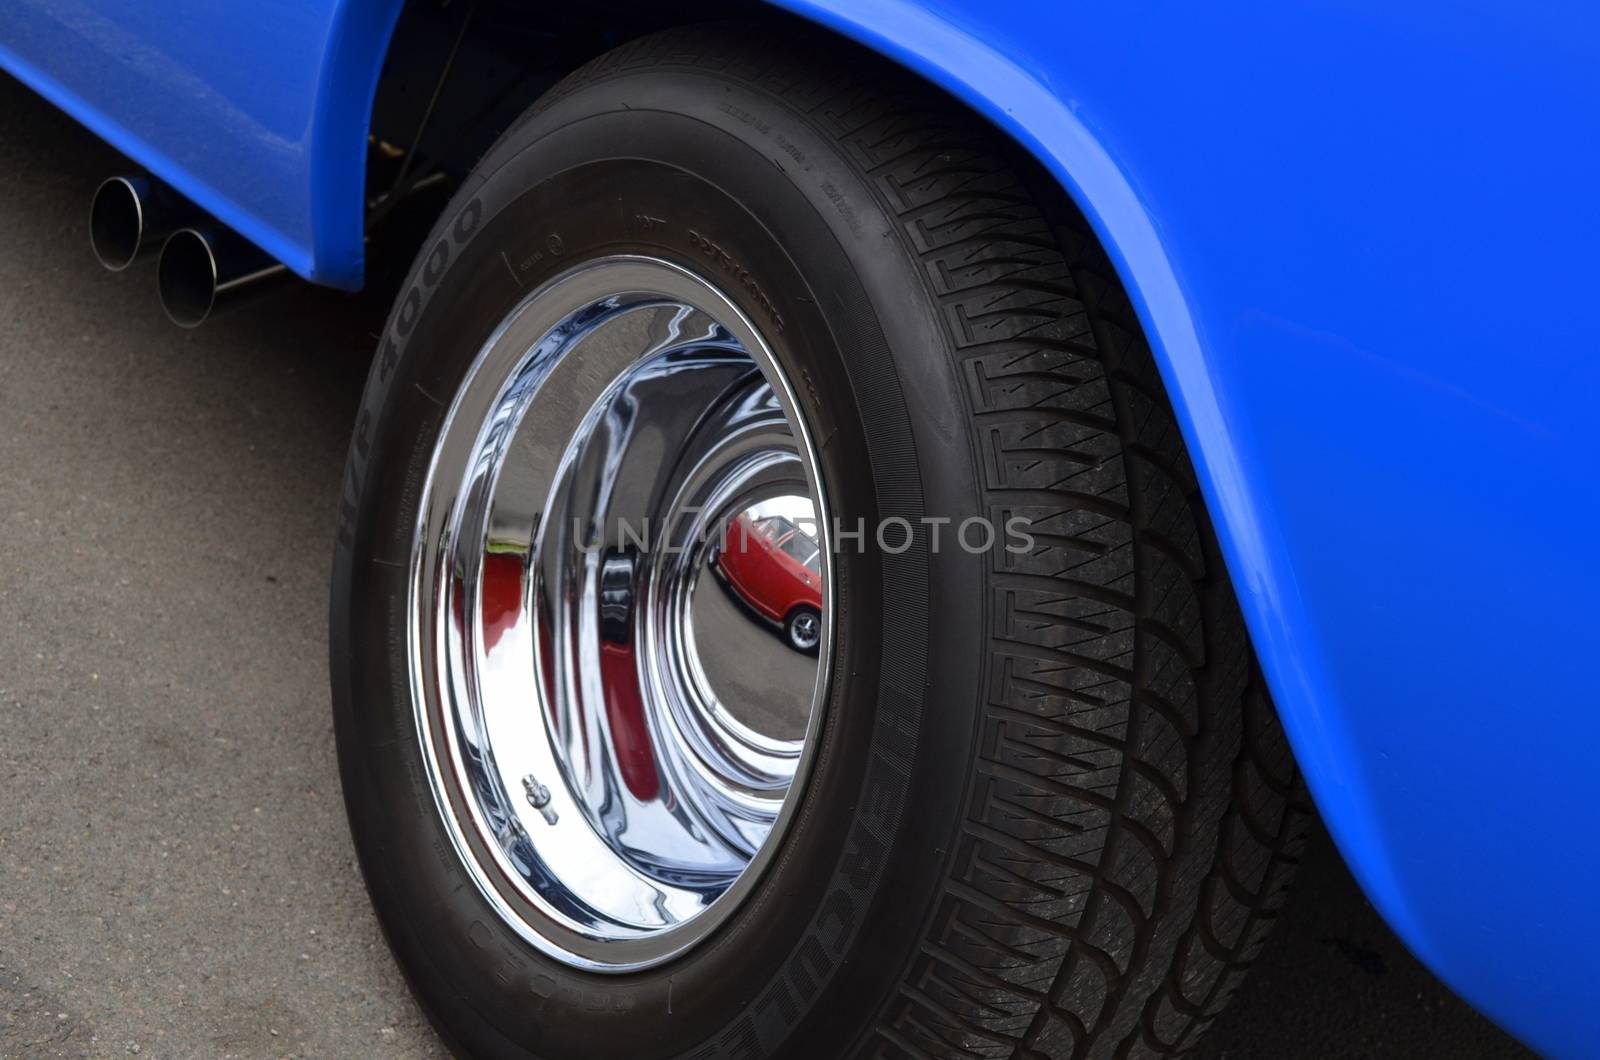 Rear wheel and tyre on a custom car showing chrome and bright paint work.